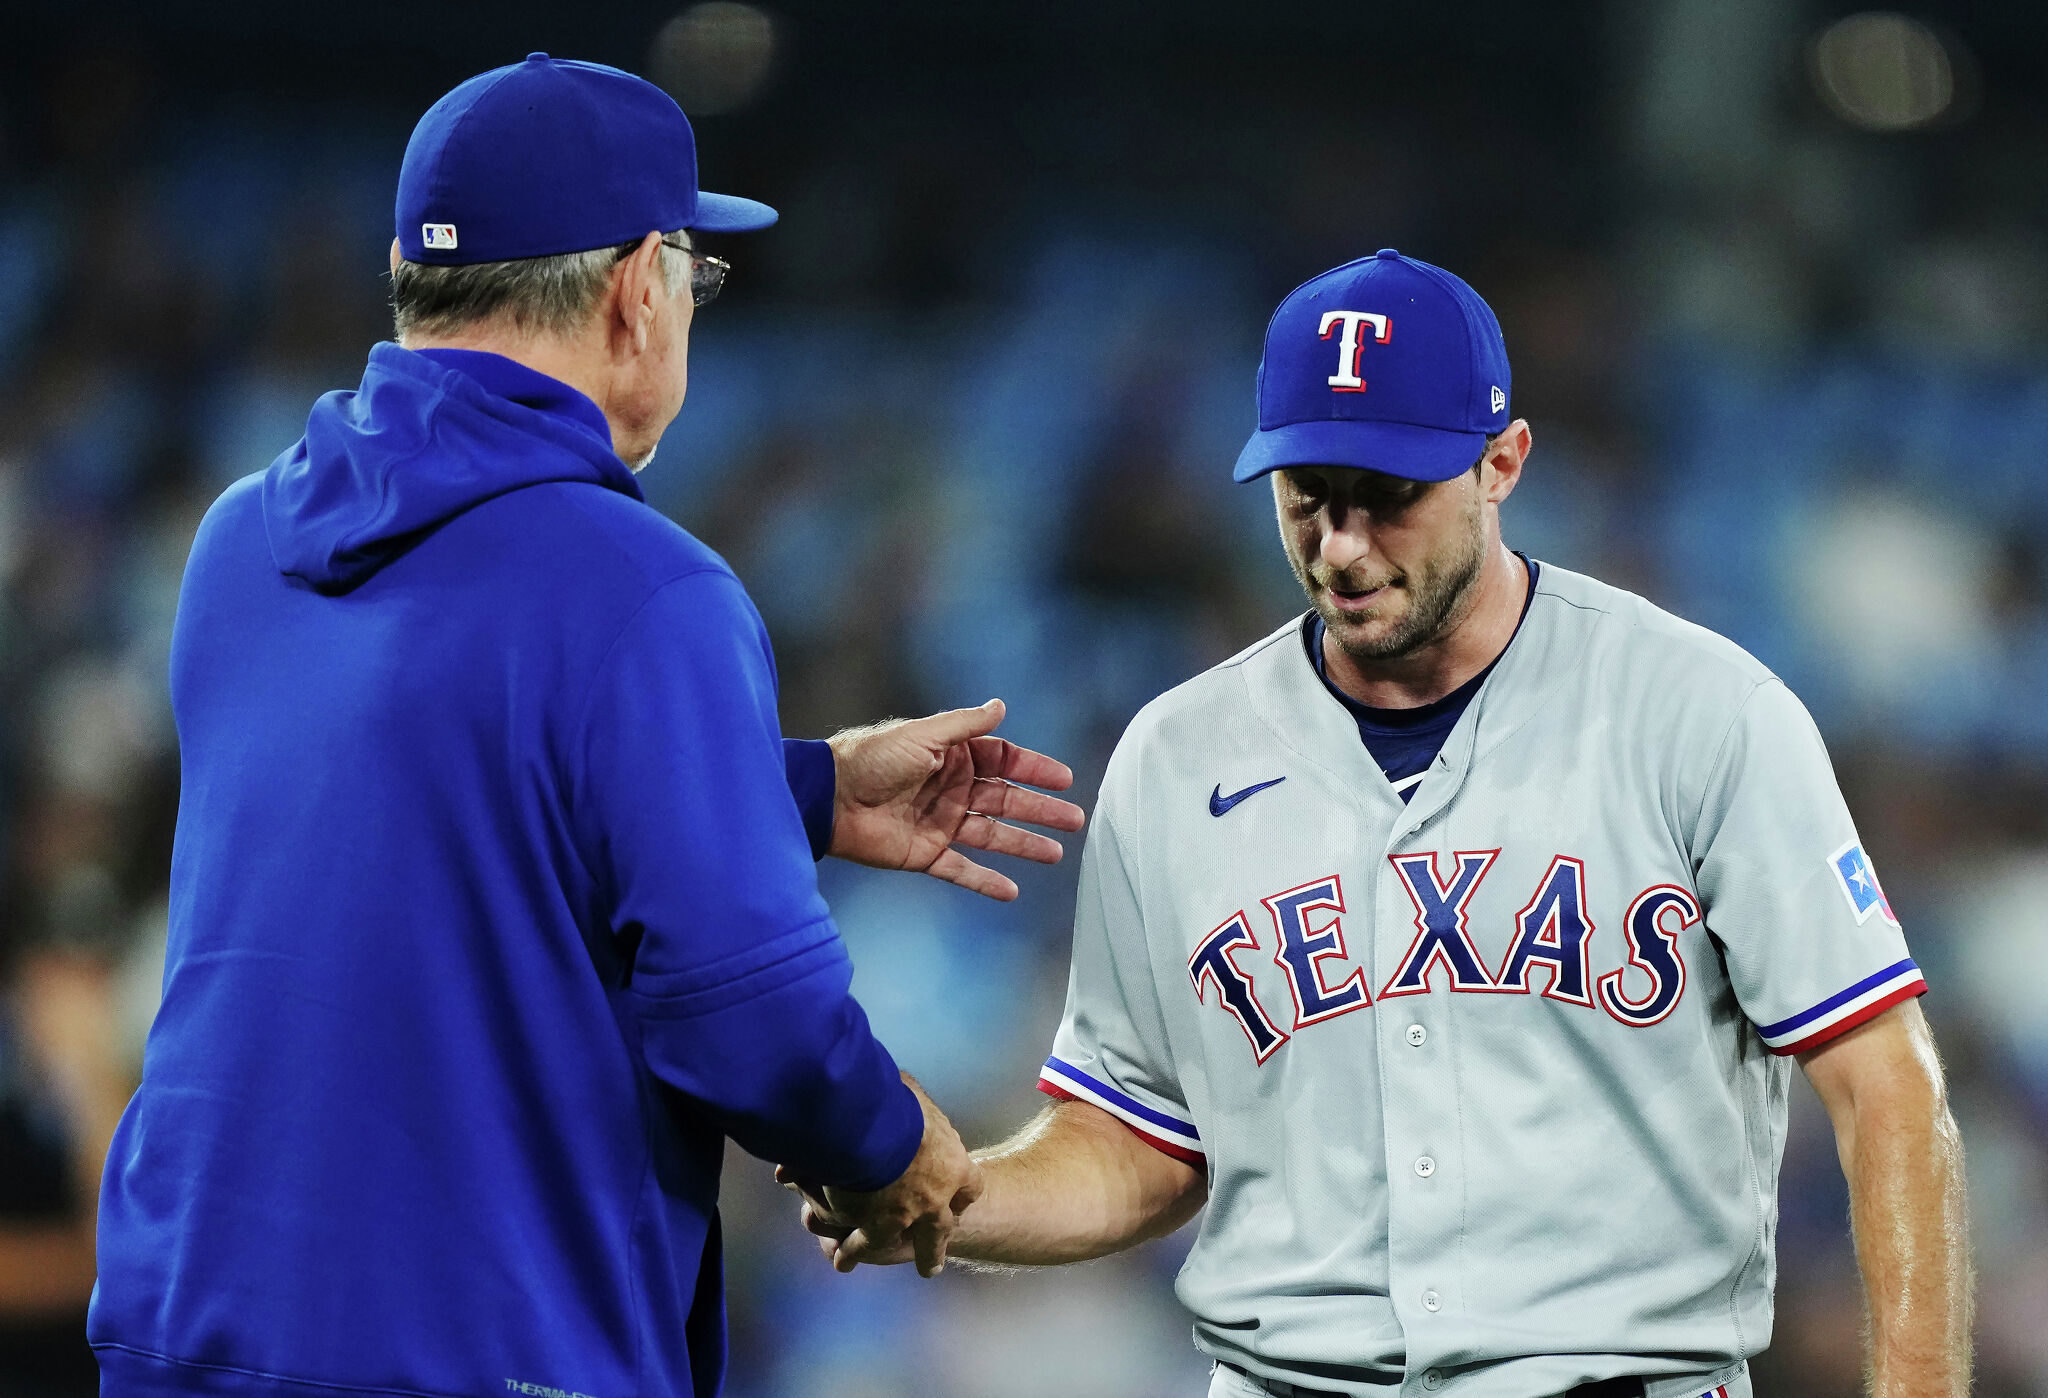 Bruce Bochy talks long walks to the mound as Rangers manager vs